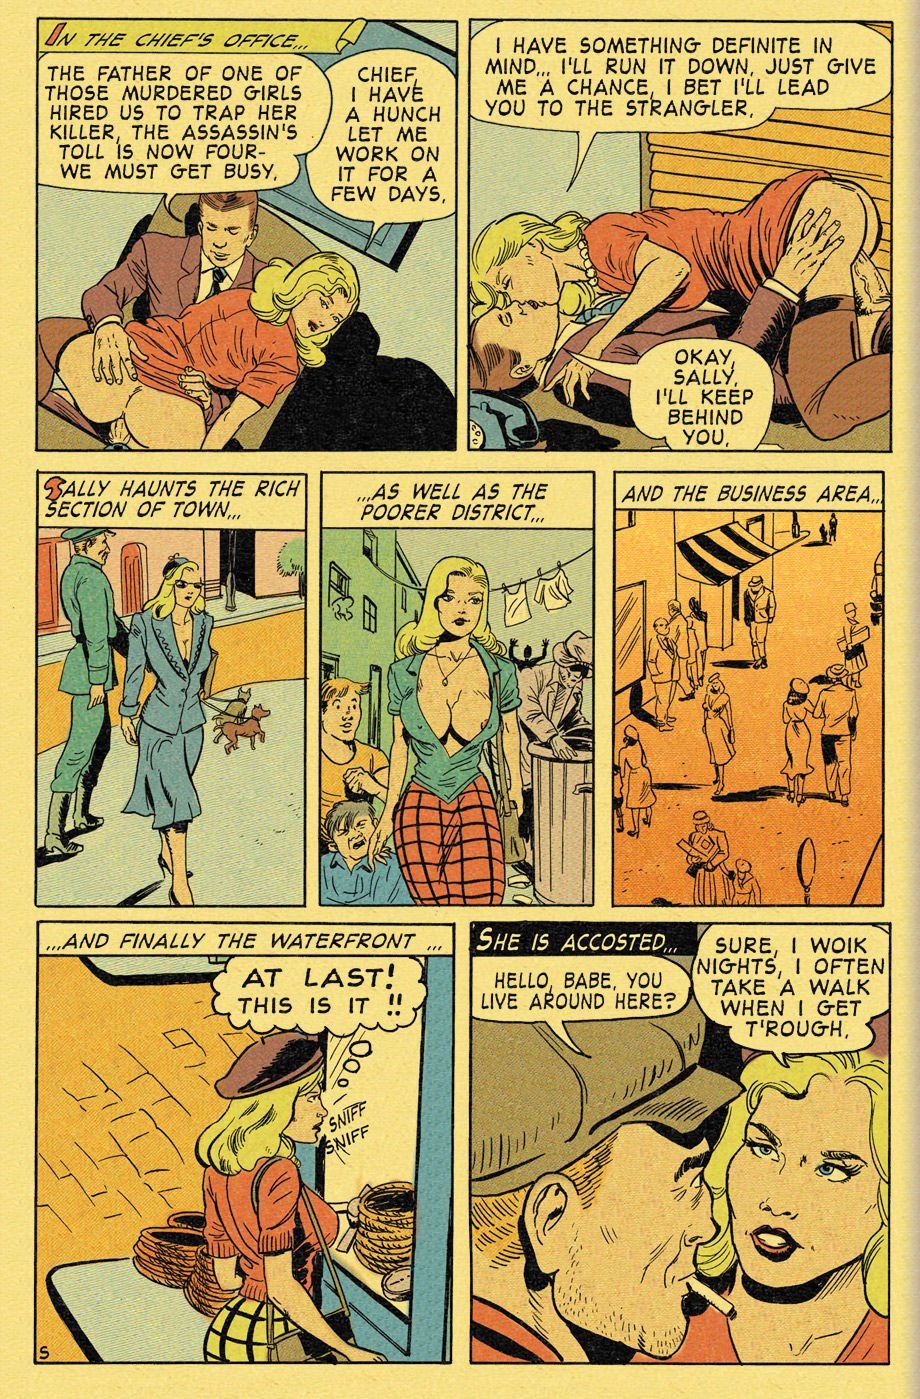 Crime Smashers Part 1 The Wertham Files page 6